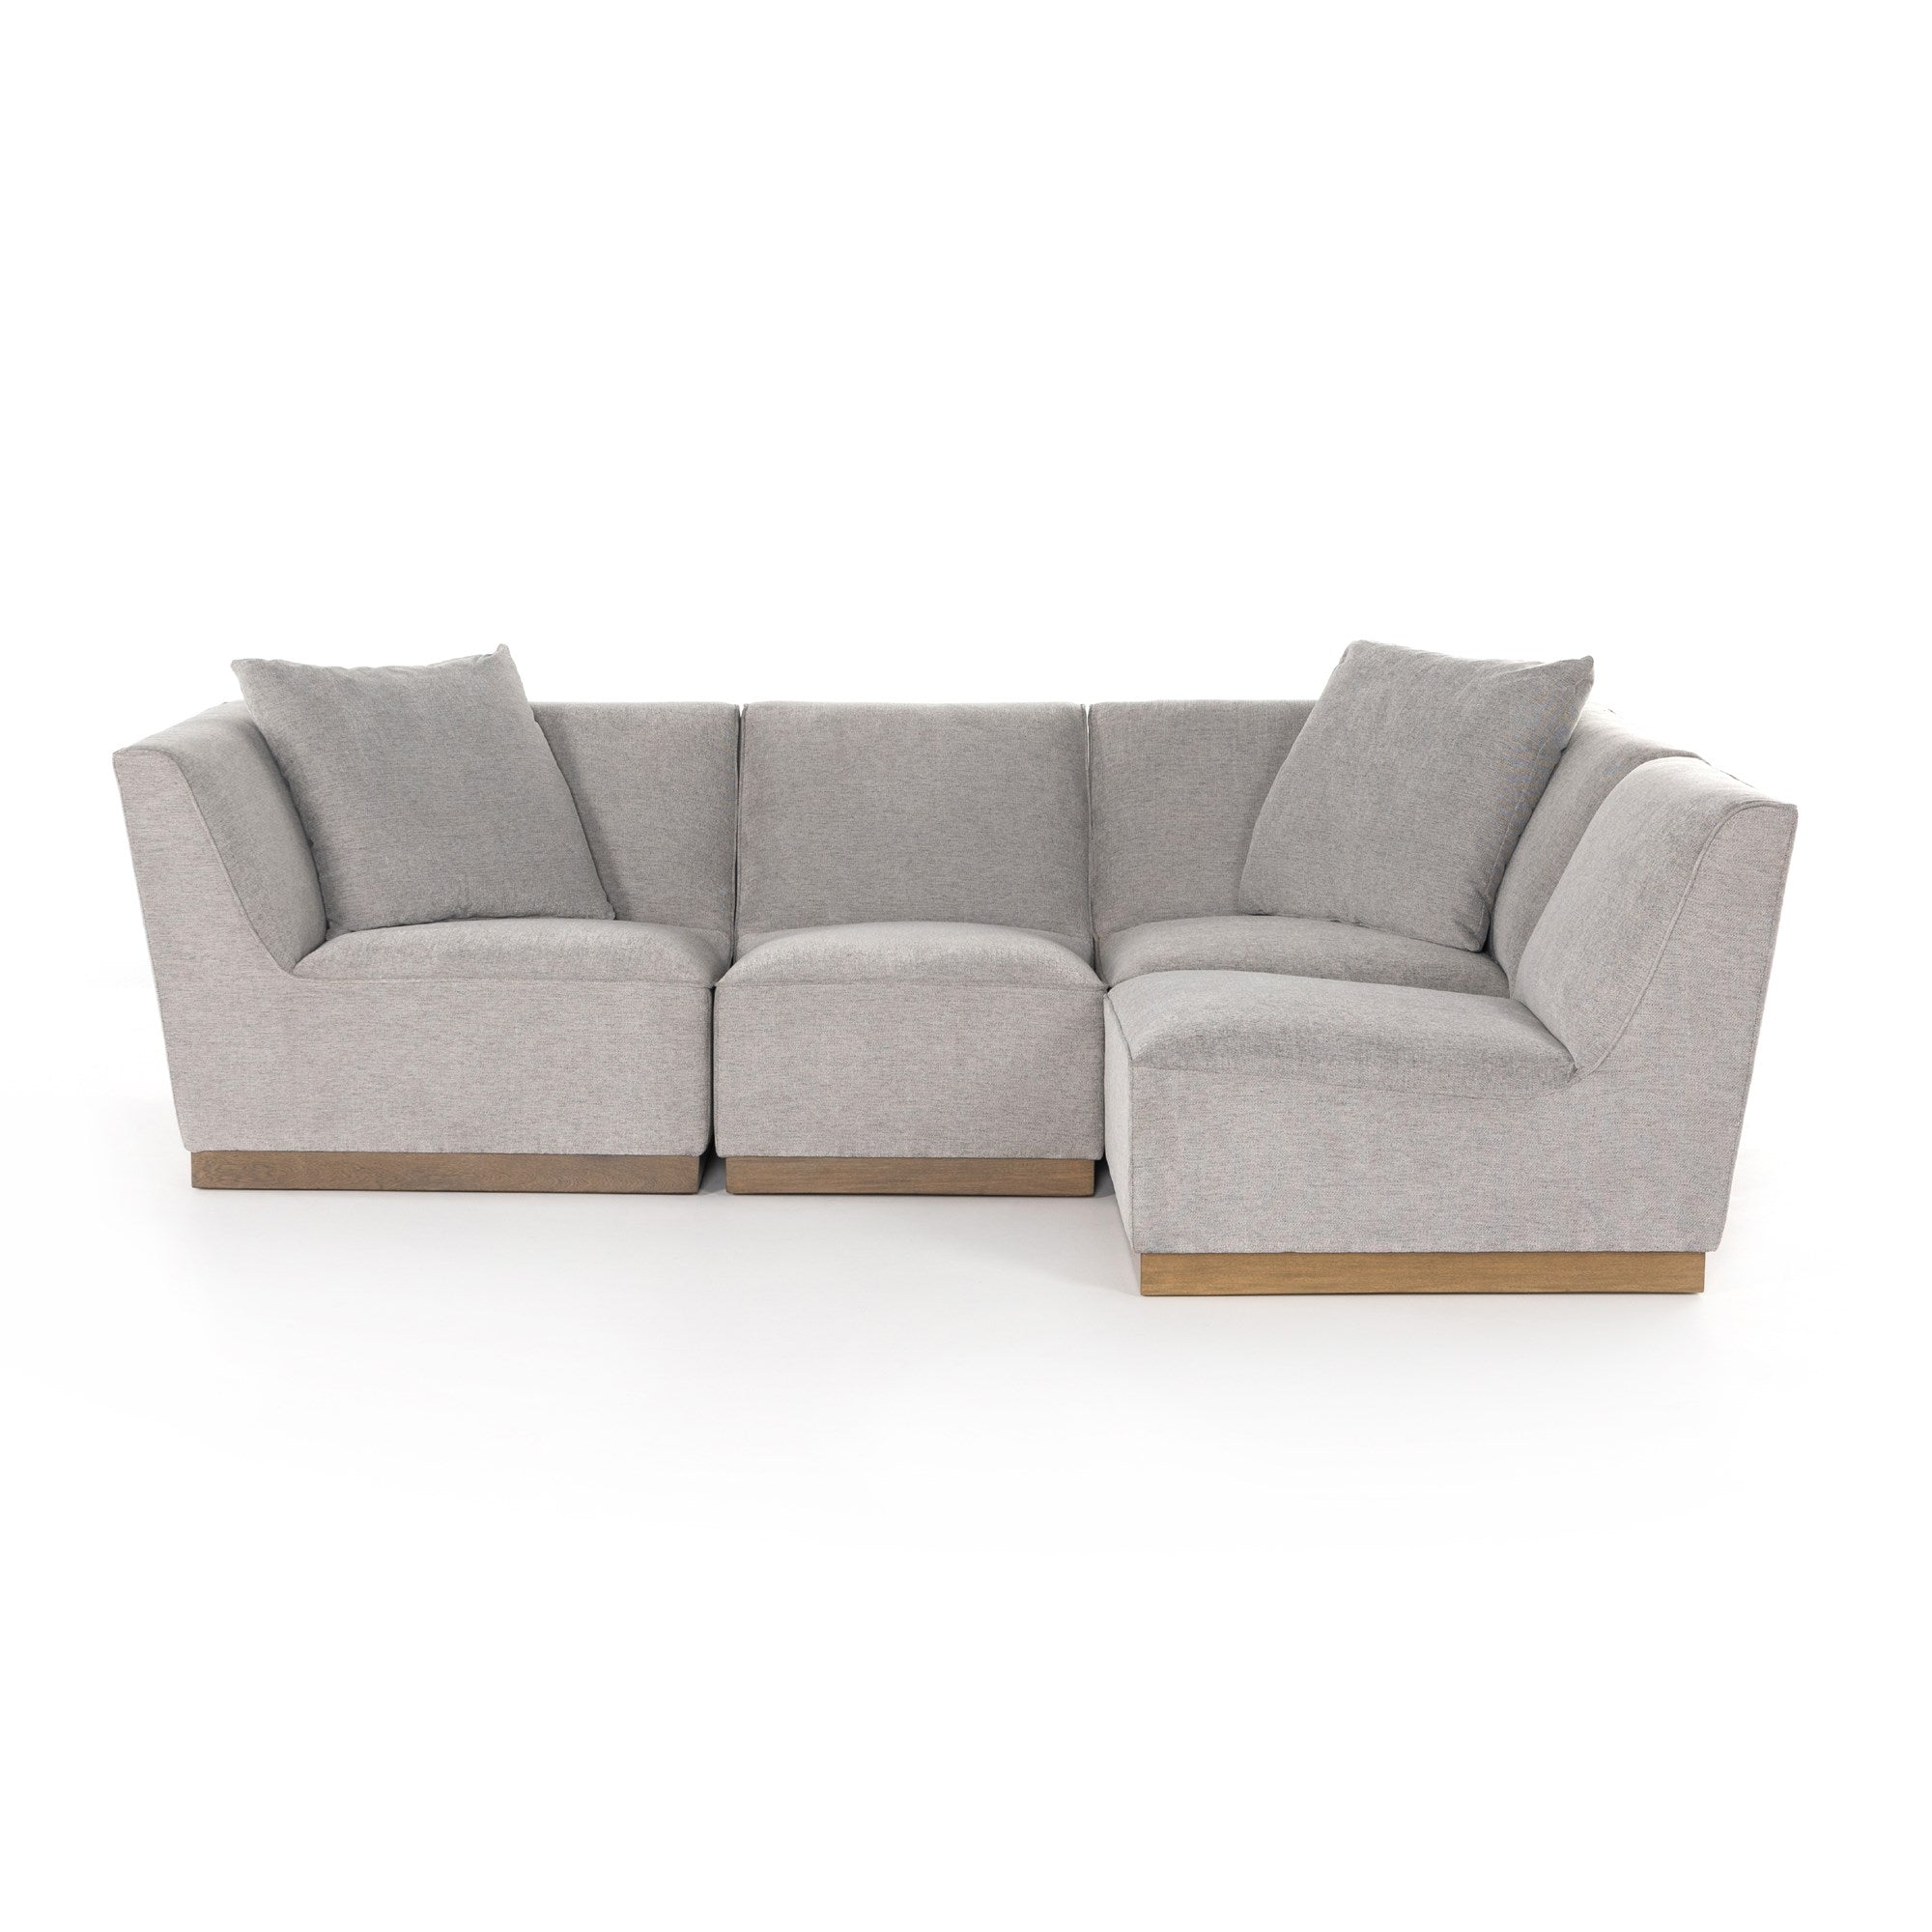 Gentry 4 Piece Sectional